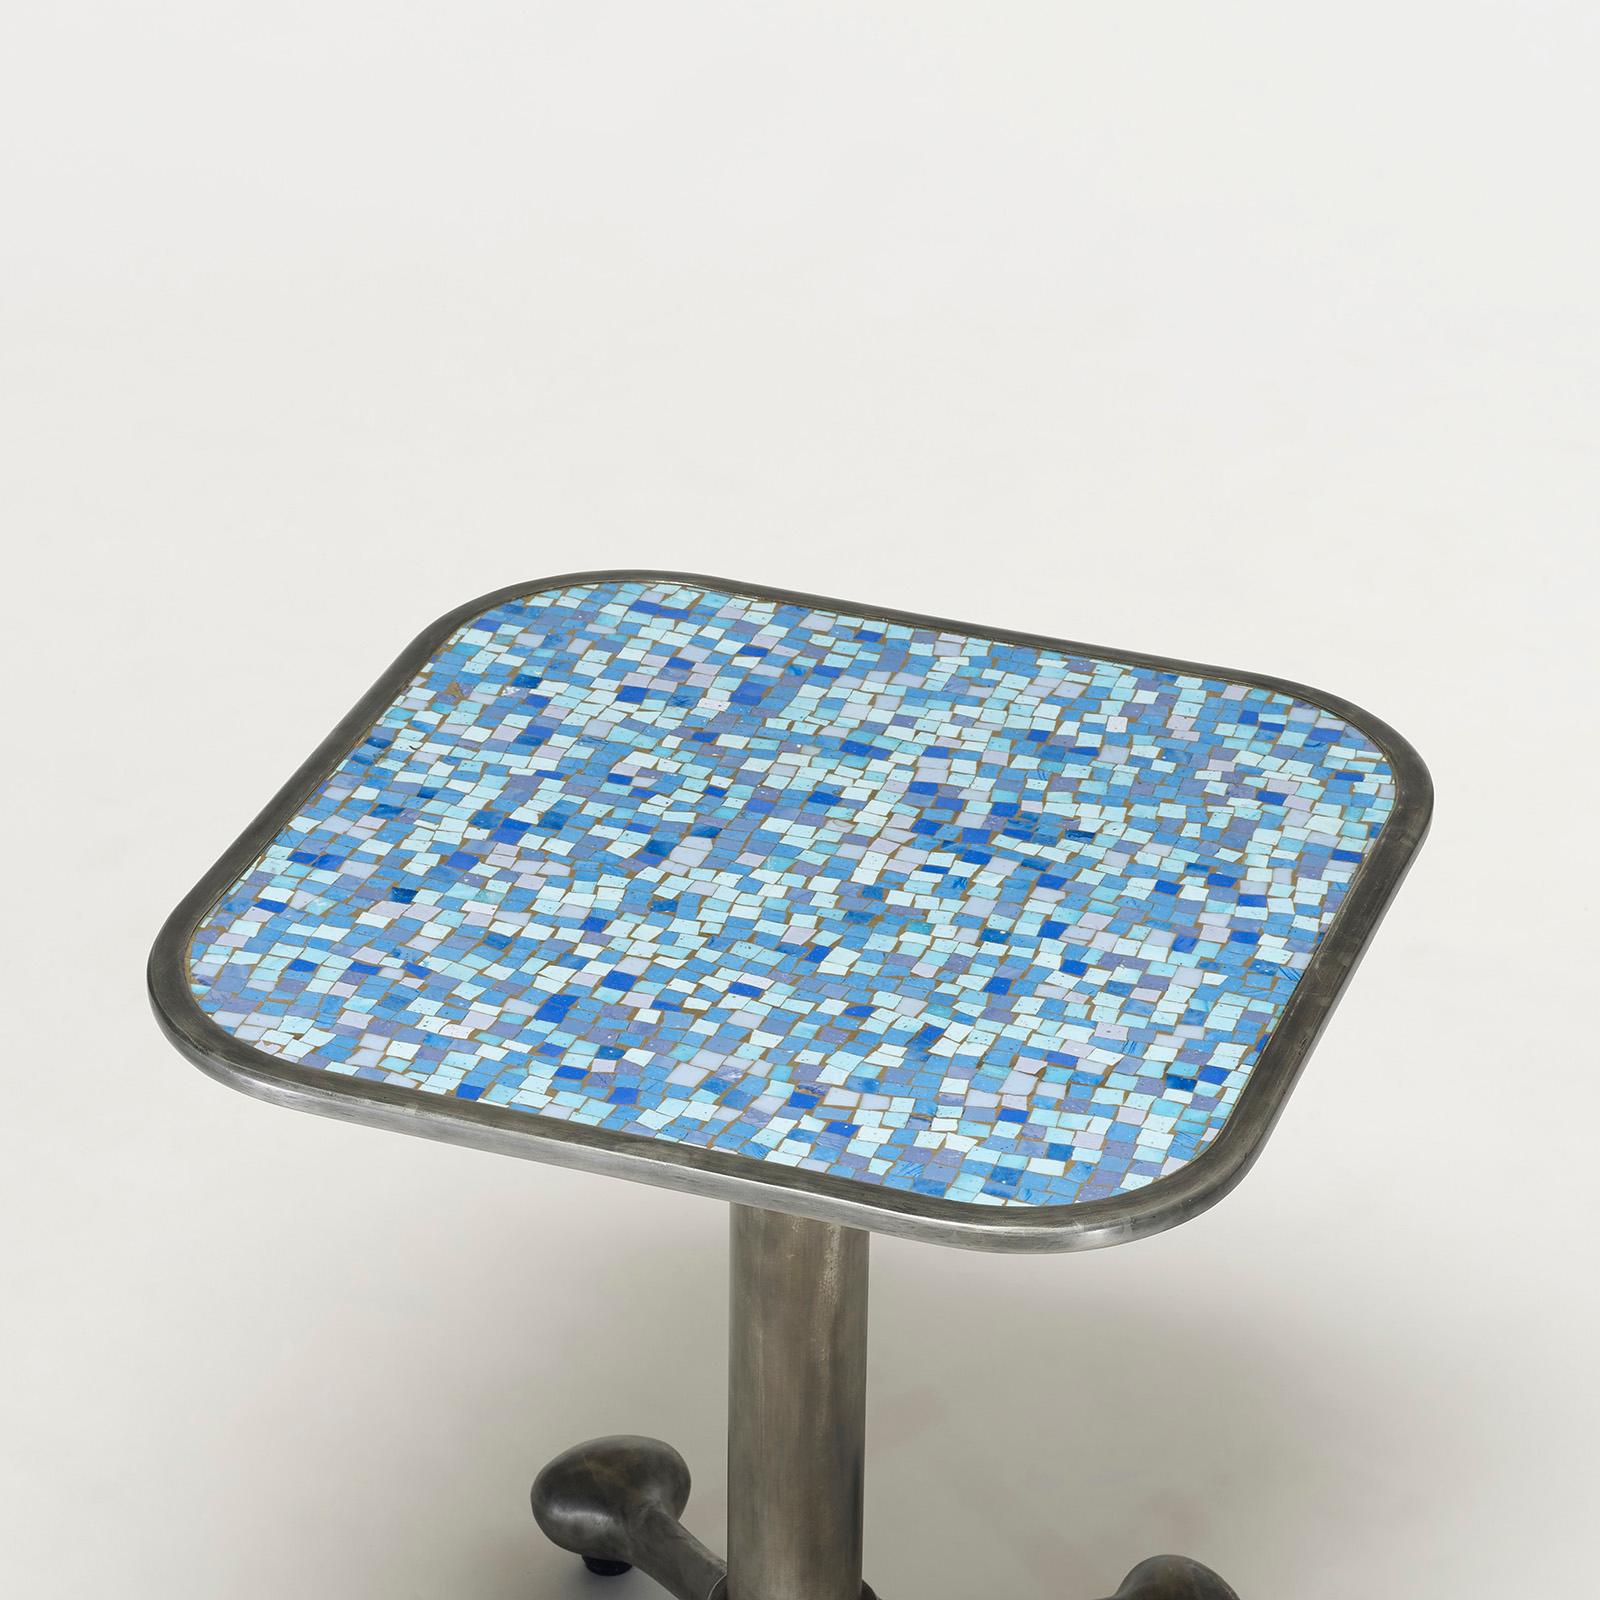 ICE Side Tables, Glass Mosaic + Cast Aluminum, Jordan Mozer, USA, 2001-2016 In New Condition For Sale In Chicago, IL